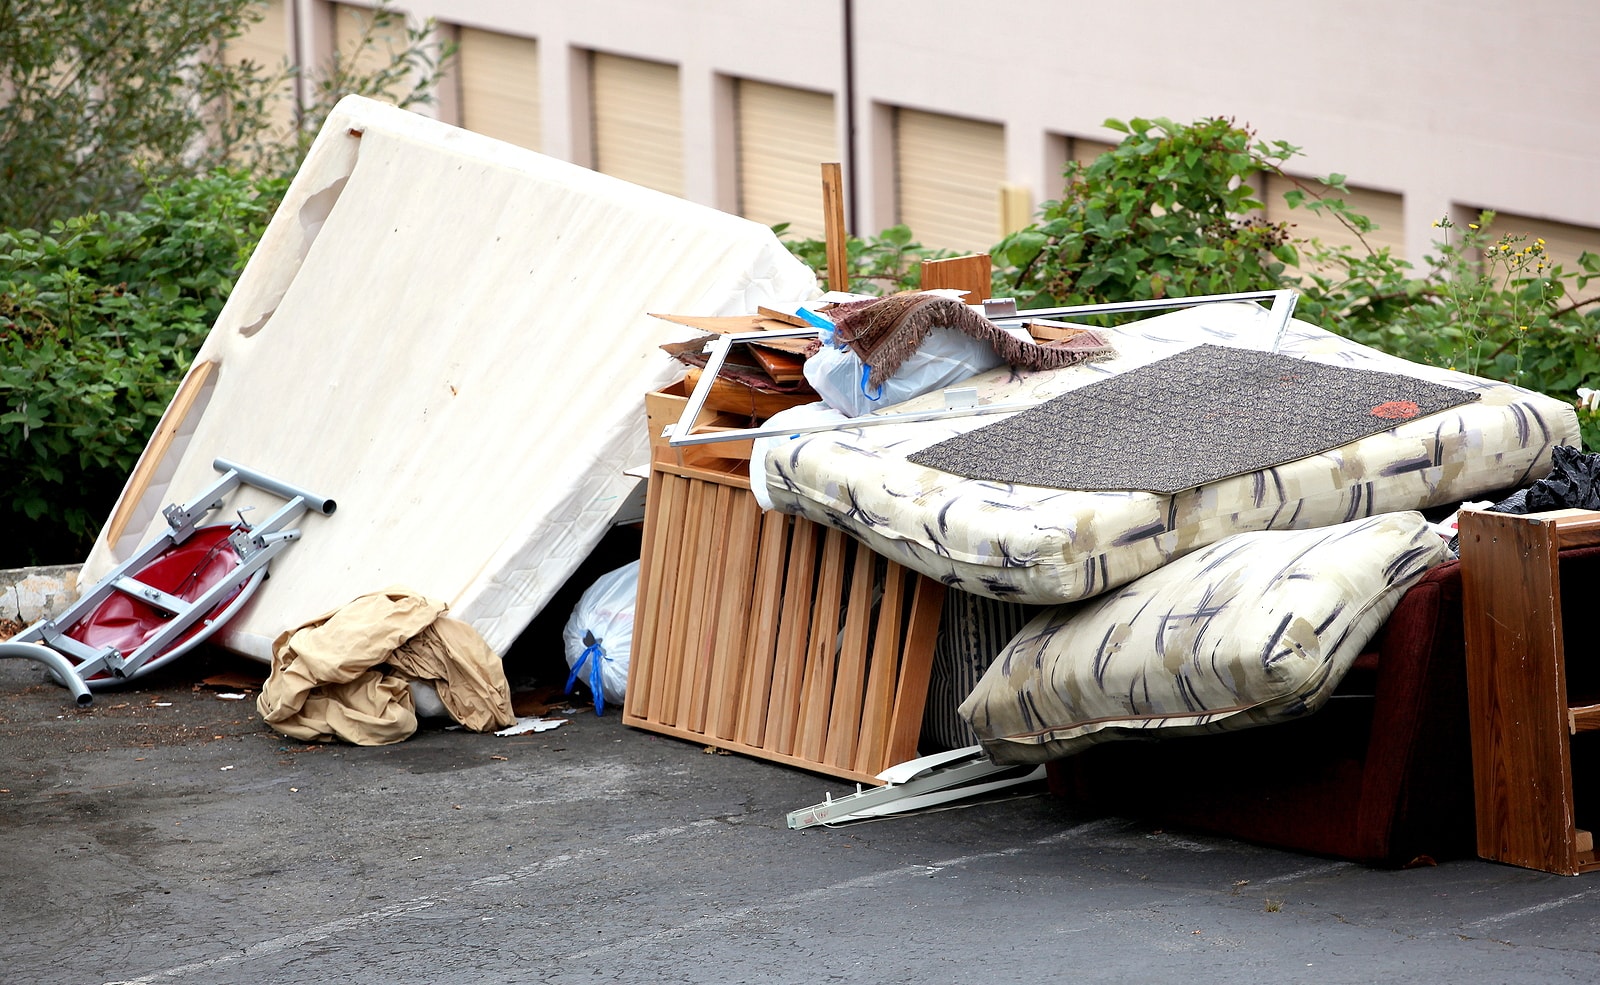 CRRA Members Report Nearly 2 Million Dollars  In Tenant Damage for 2019!